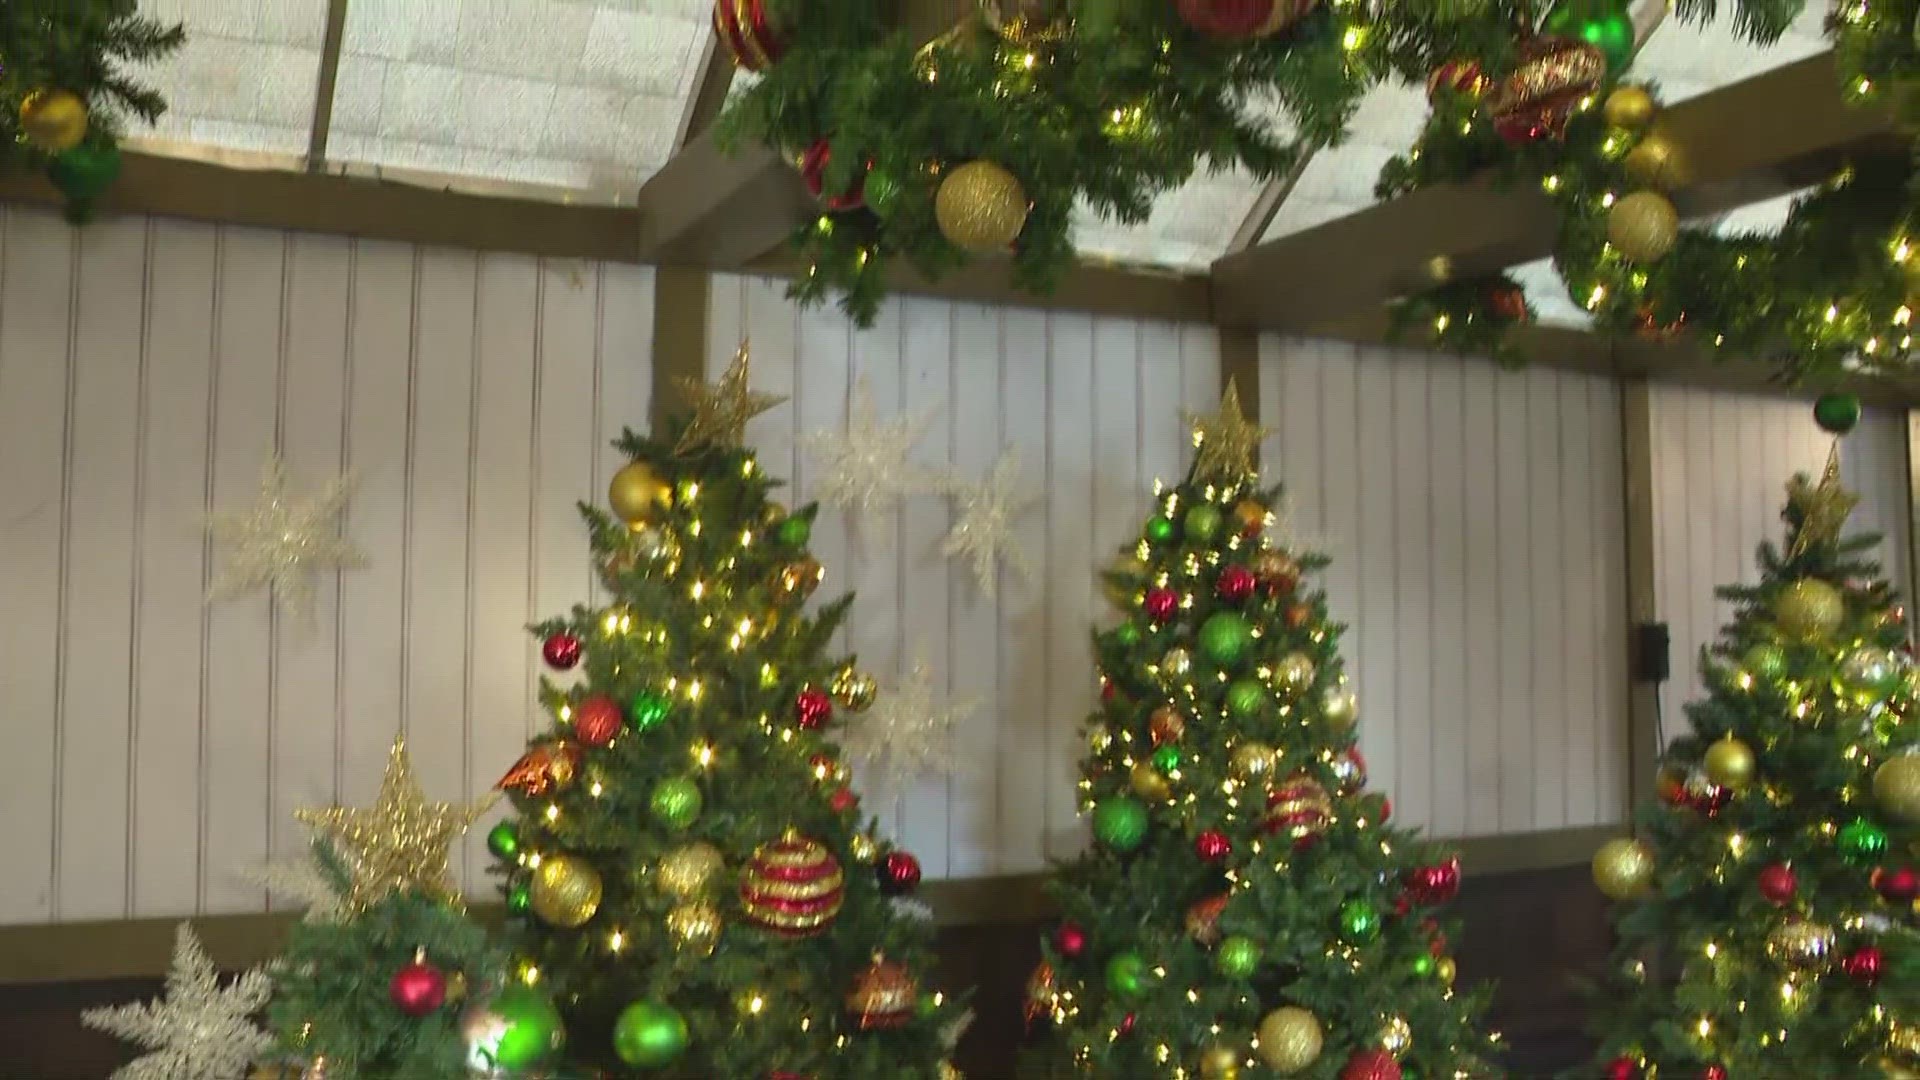 Since 1967, Christmas at the Zoo has been a holiday favorite for Hoosiers across the city.